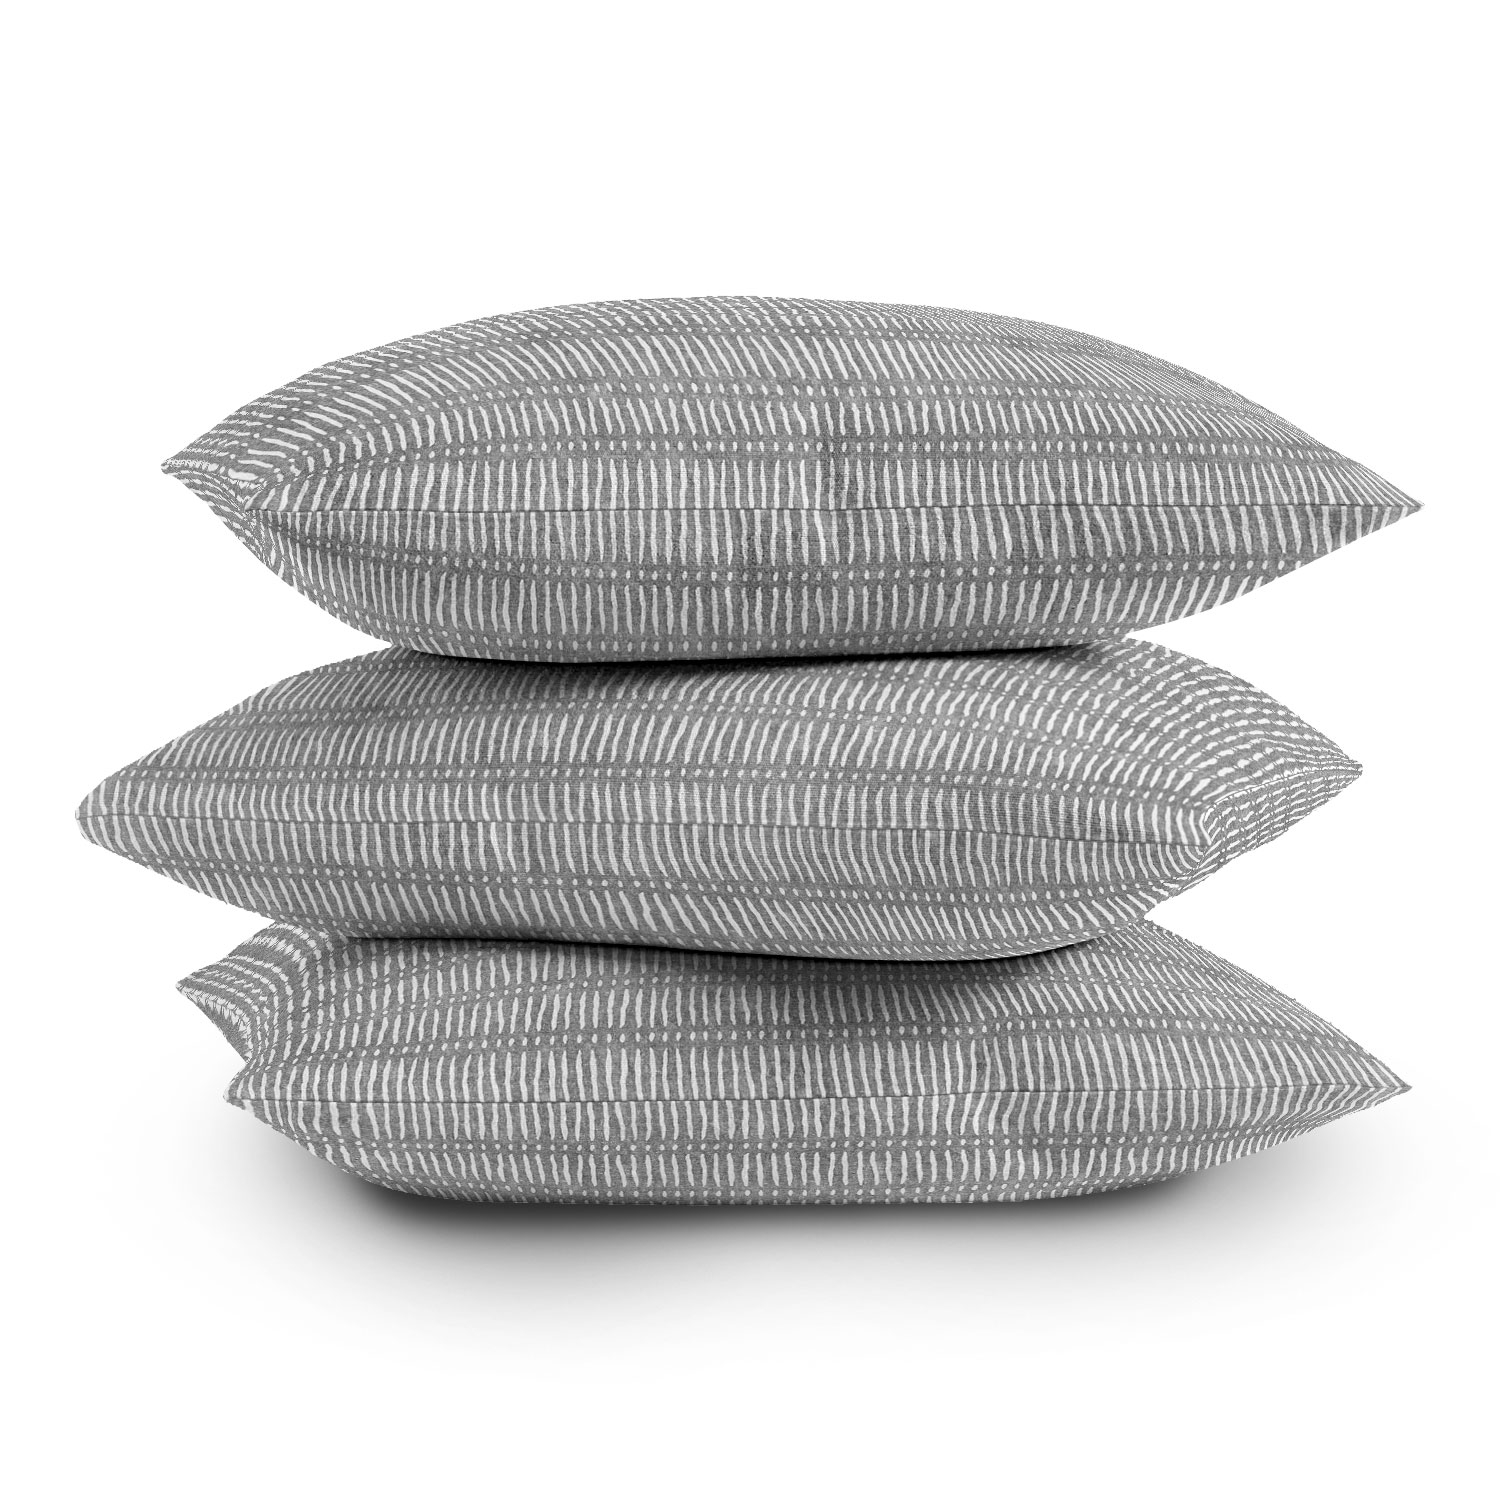 Mud Cloth Dash Gray by Little Arrow Design Co - Outdoor Throw Pillow 16" x 16" - Image 3